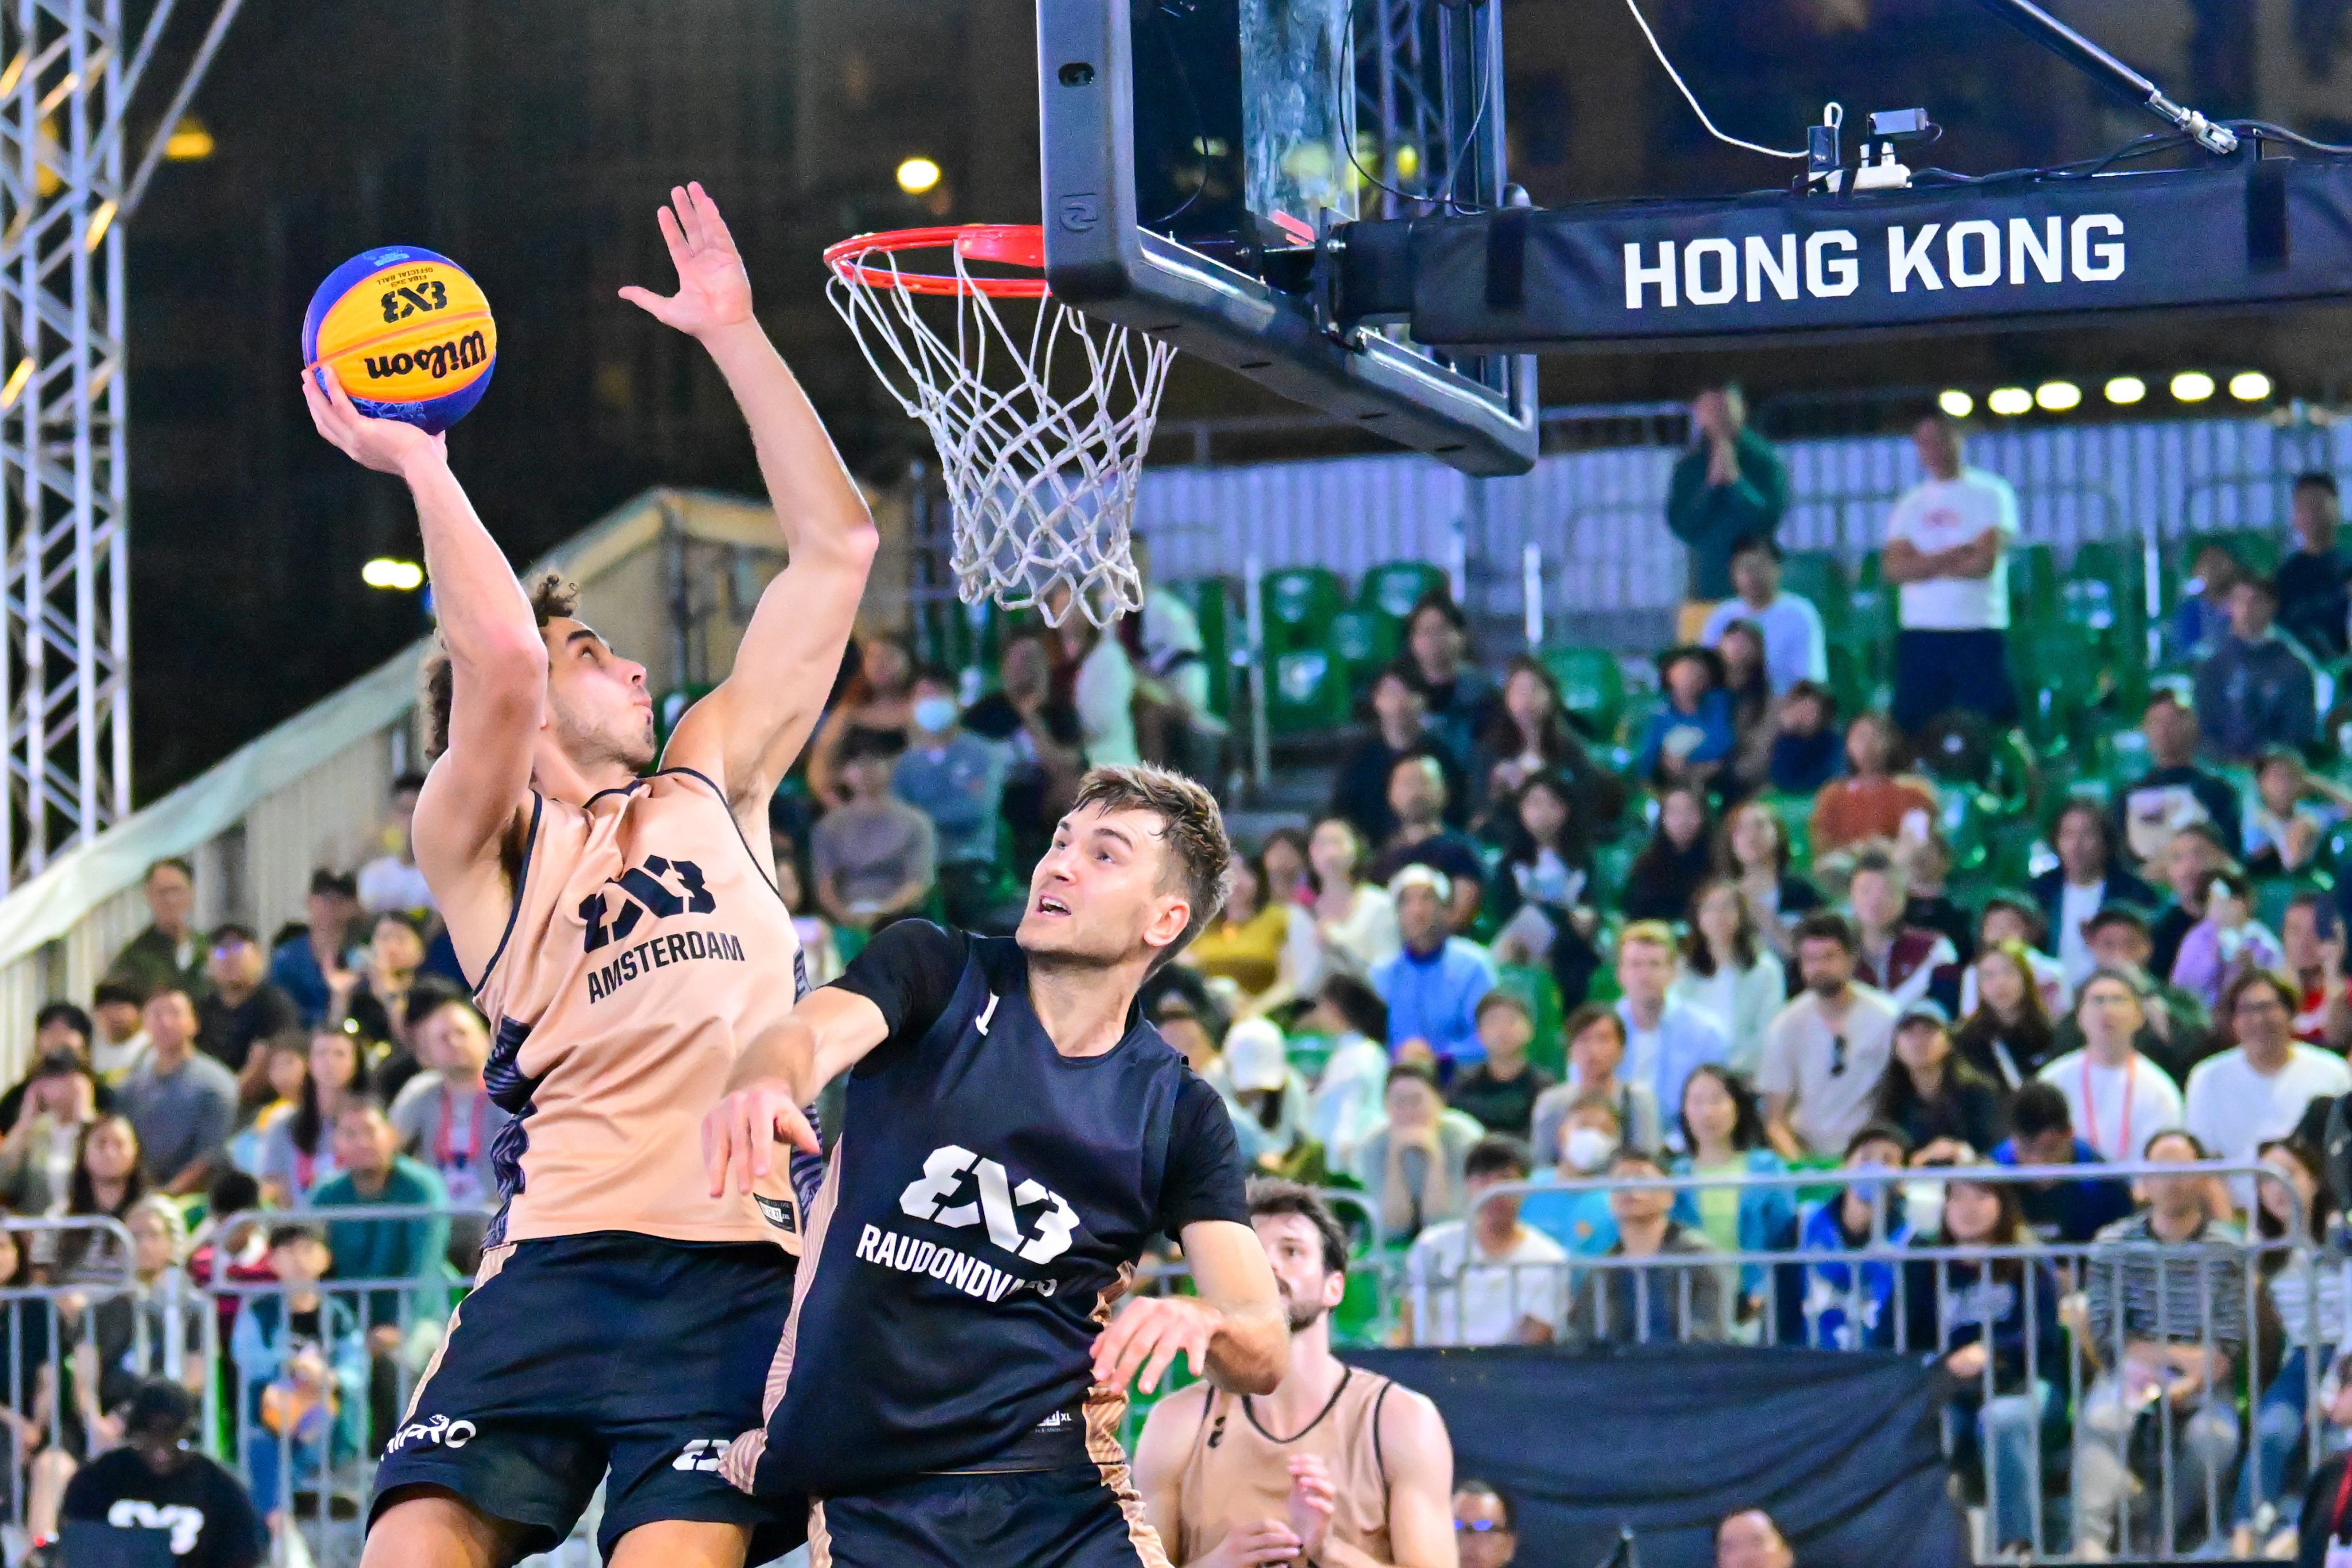 Jan Driessen (left) of Amsterdam HiPRO goes for a lay-up at last year’s World Tour Hong Kong Masters. Photo: Xinhua